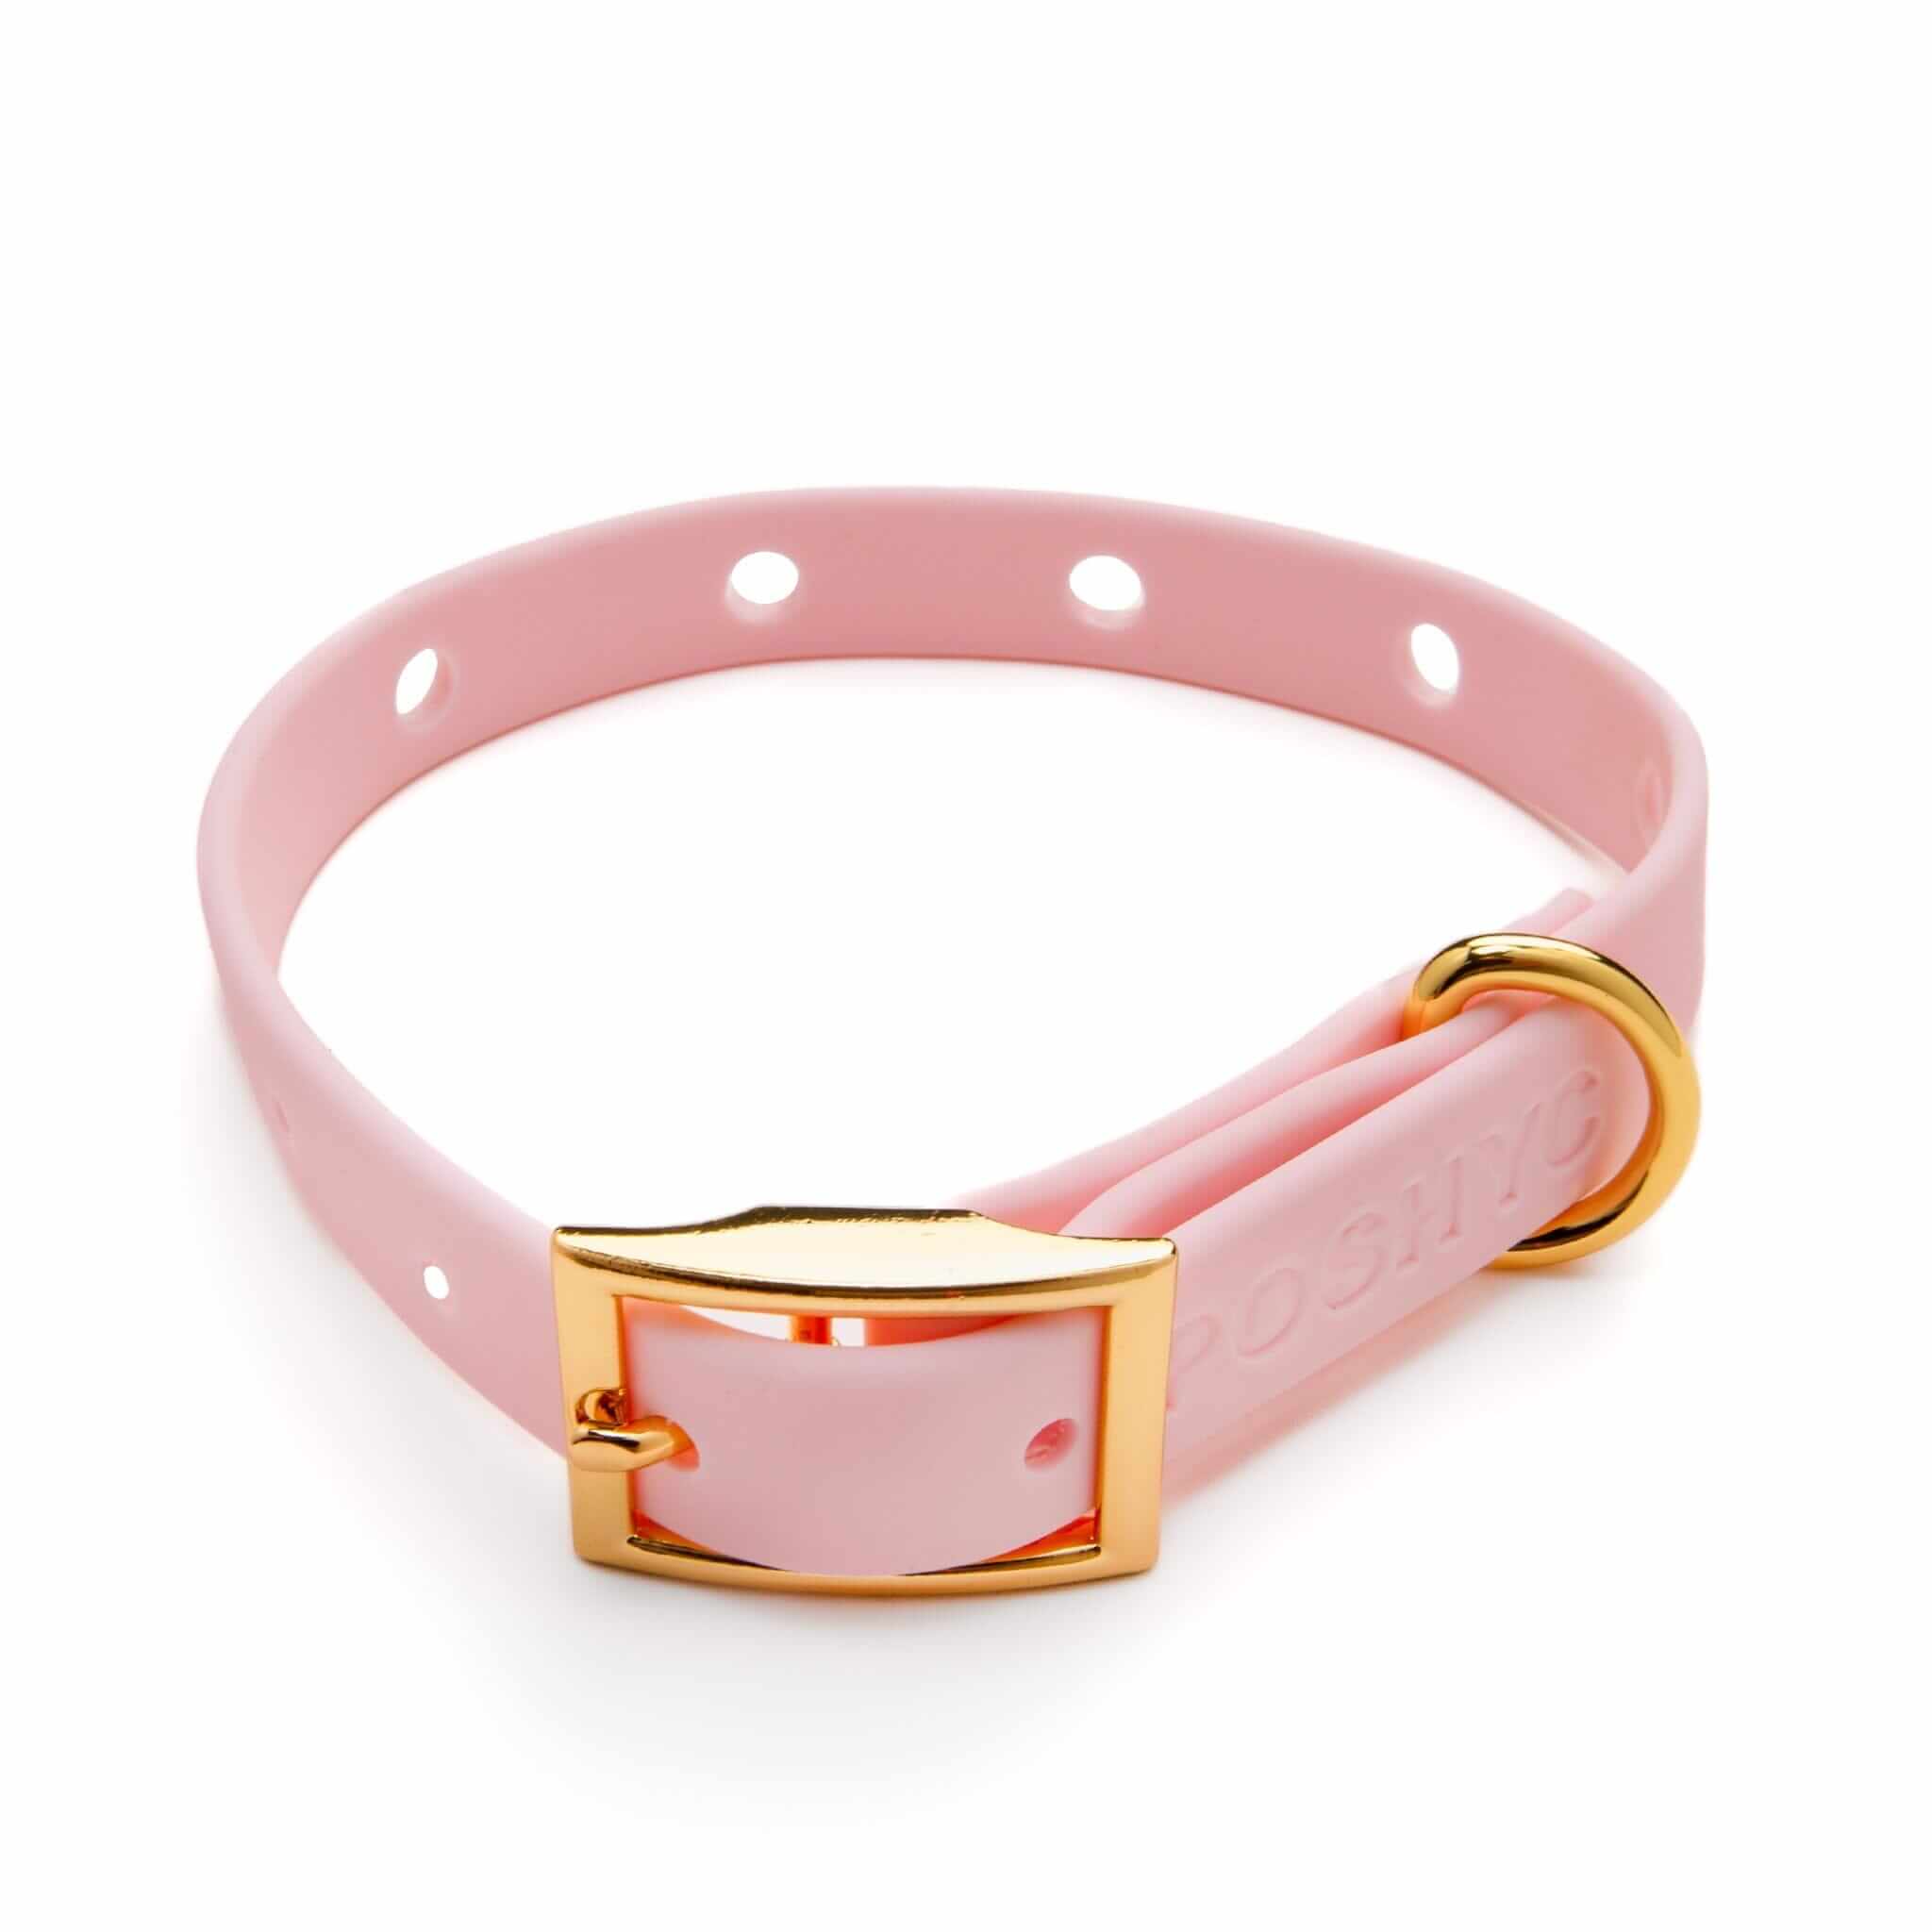 ClipUp Collar - Style and Function | POSHYC